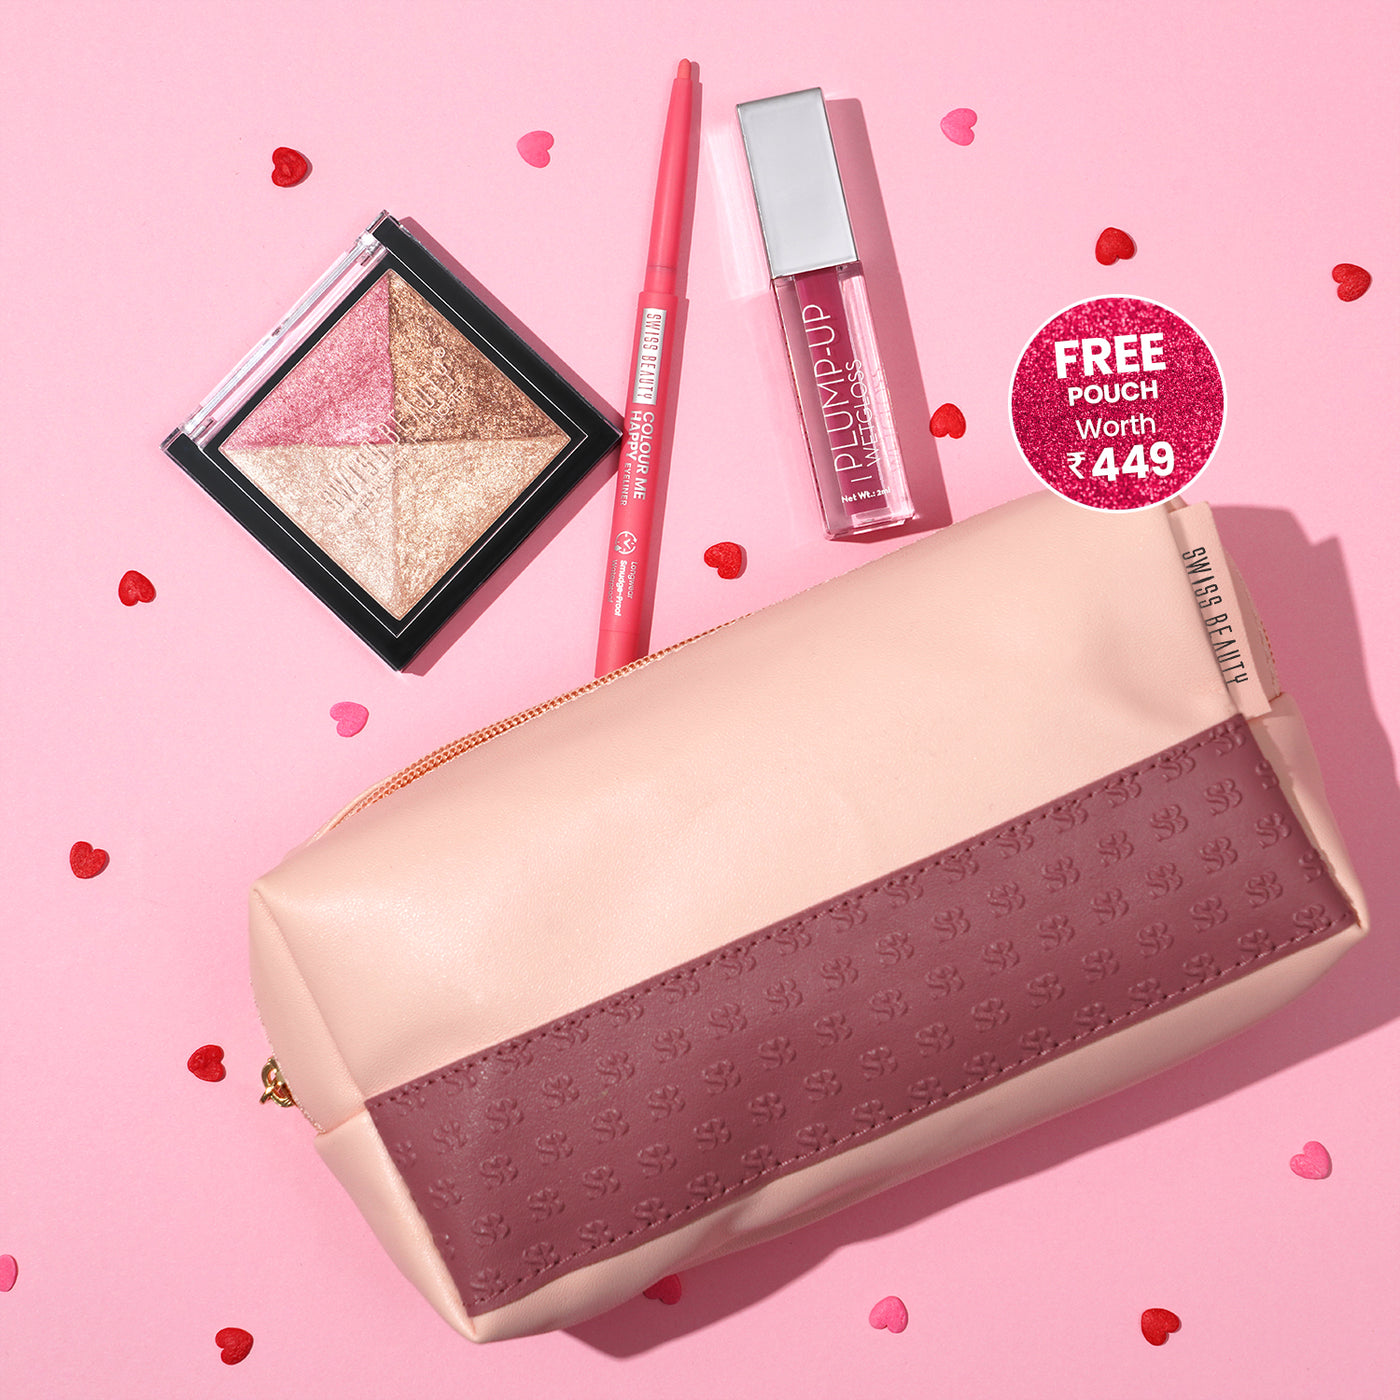 Soft Dewy Natural Look Makeup Kit (FREE Pouch worth Rs 449)